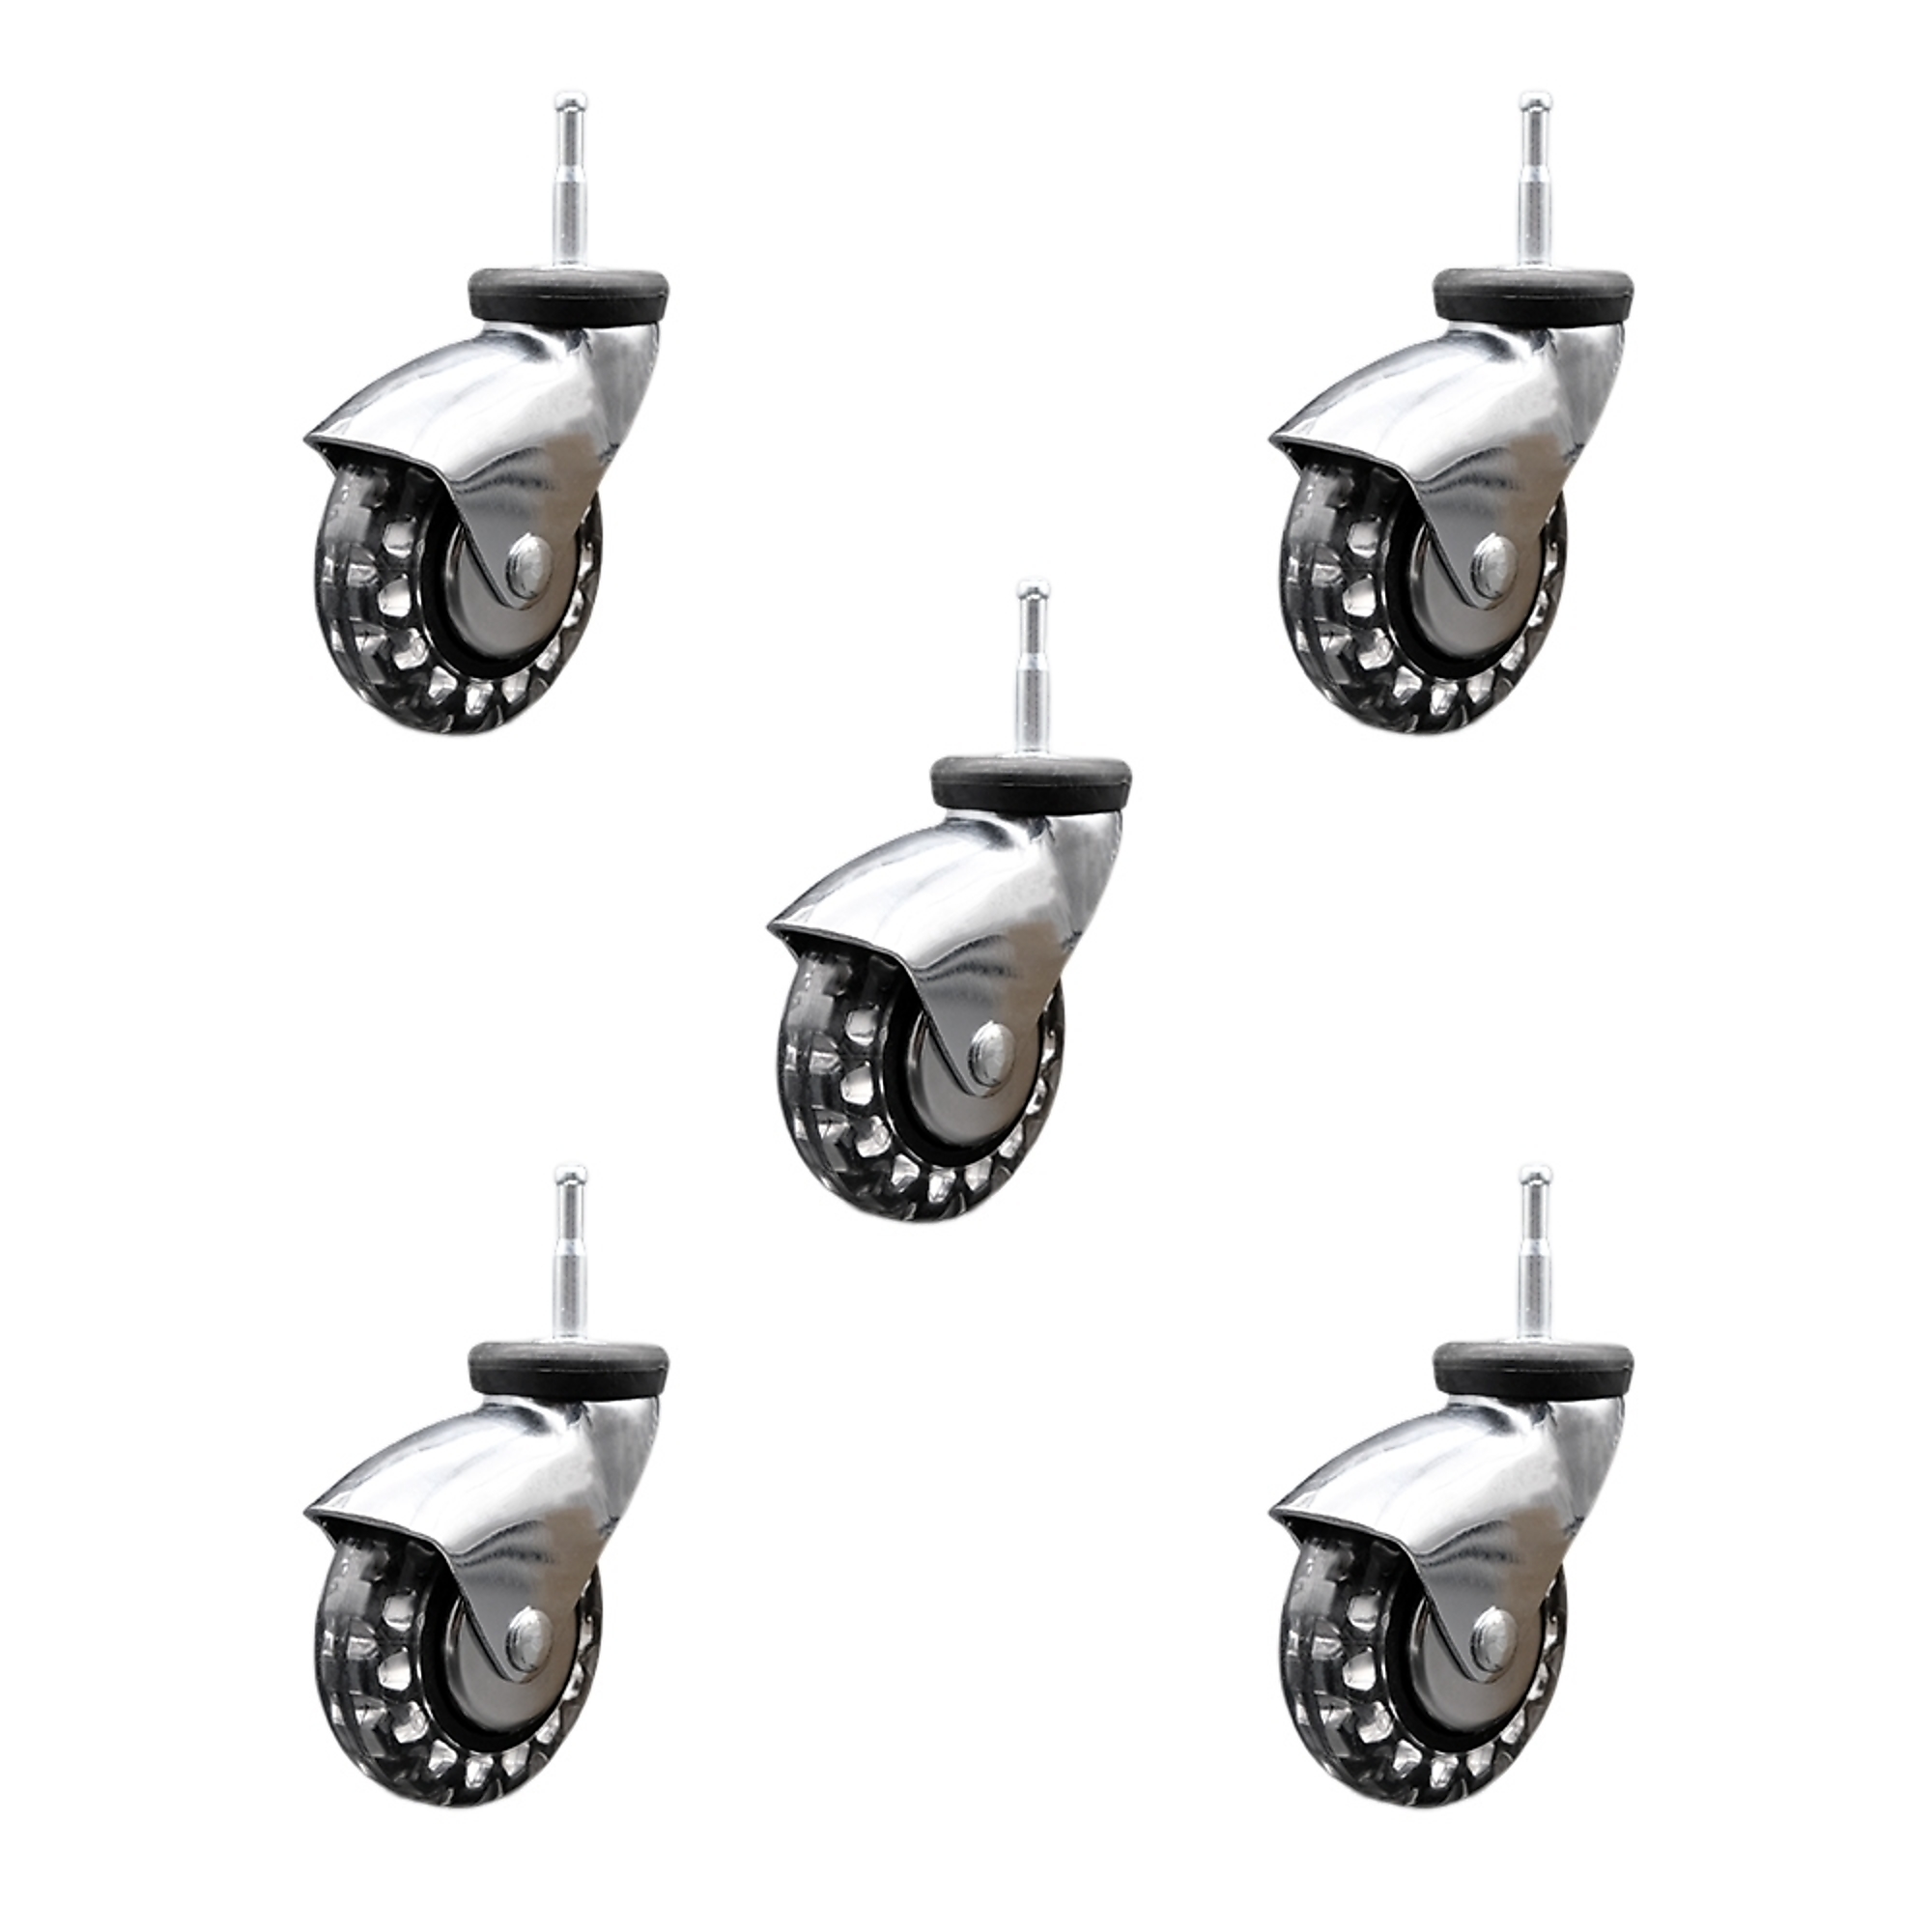 3Inch x 15/16Inch Stem Casters, Wheel Diameter 3 in, Caster Type Swivel, Package (qty.) 5, Model - Service Caster SCC-GN03S310-PPUBD-BC-5